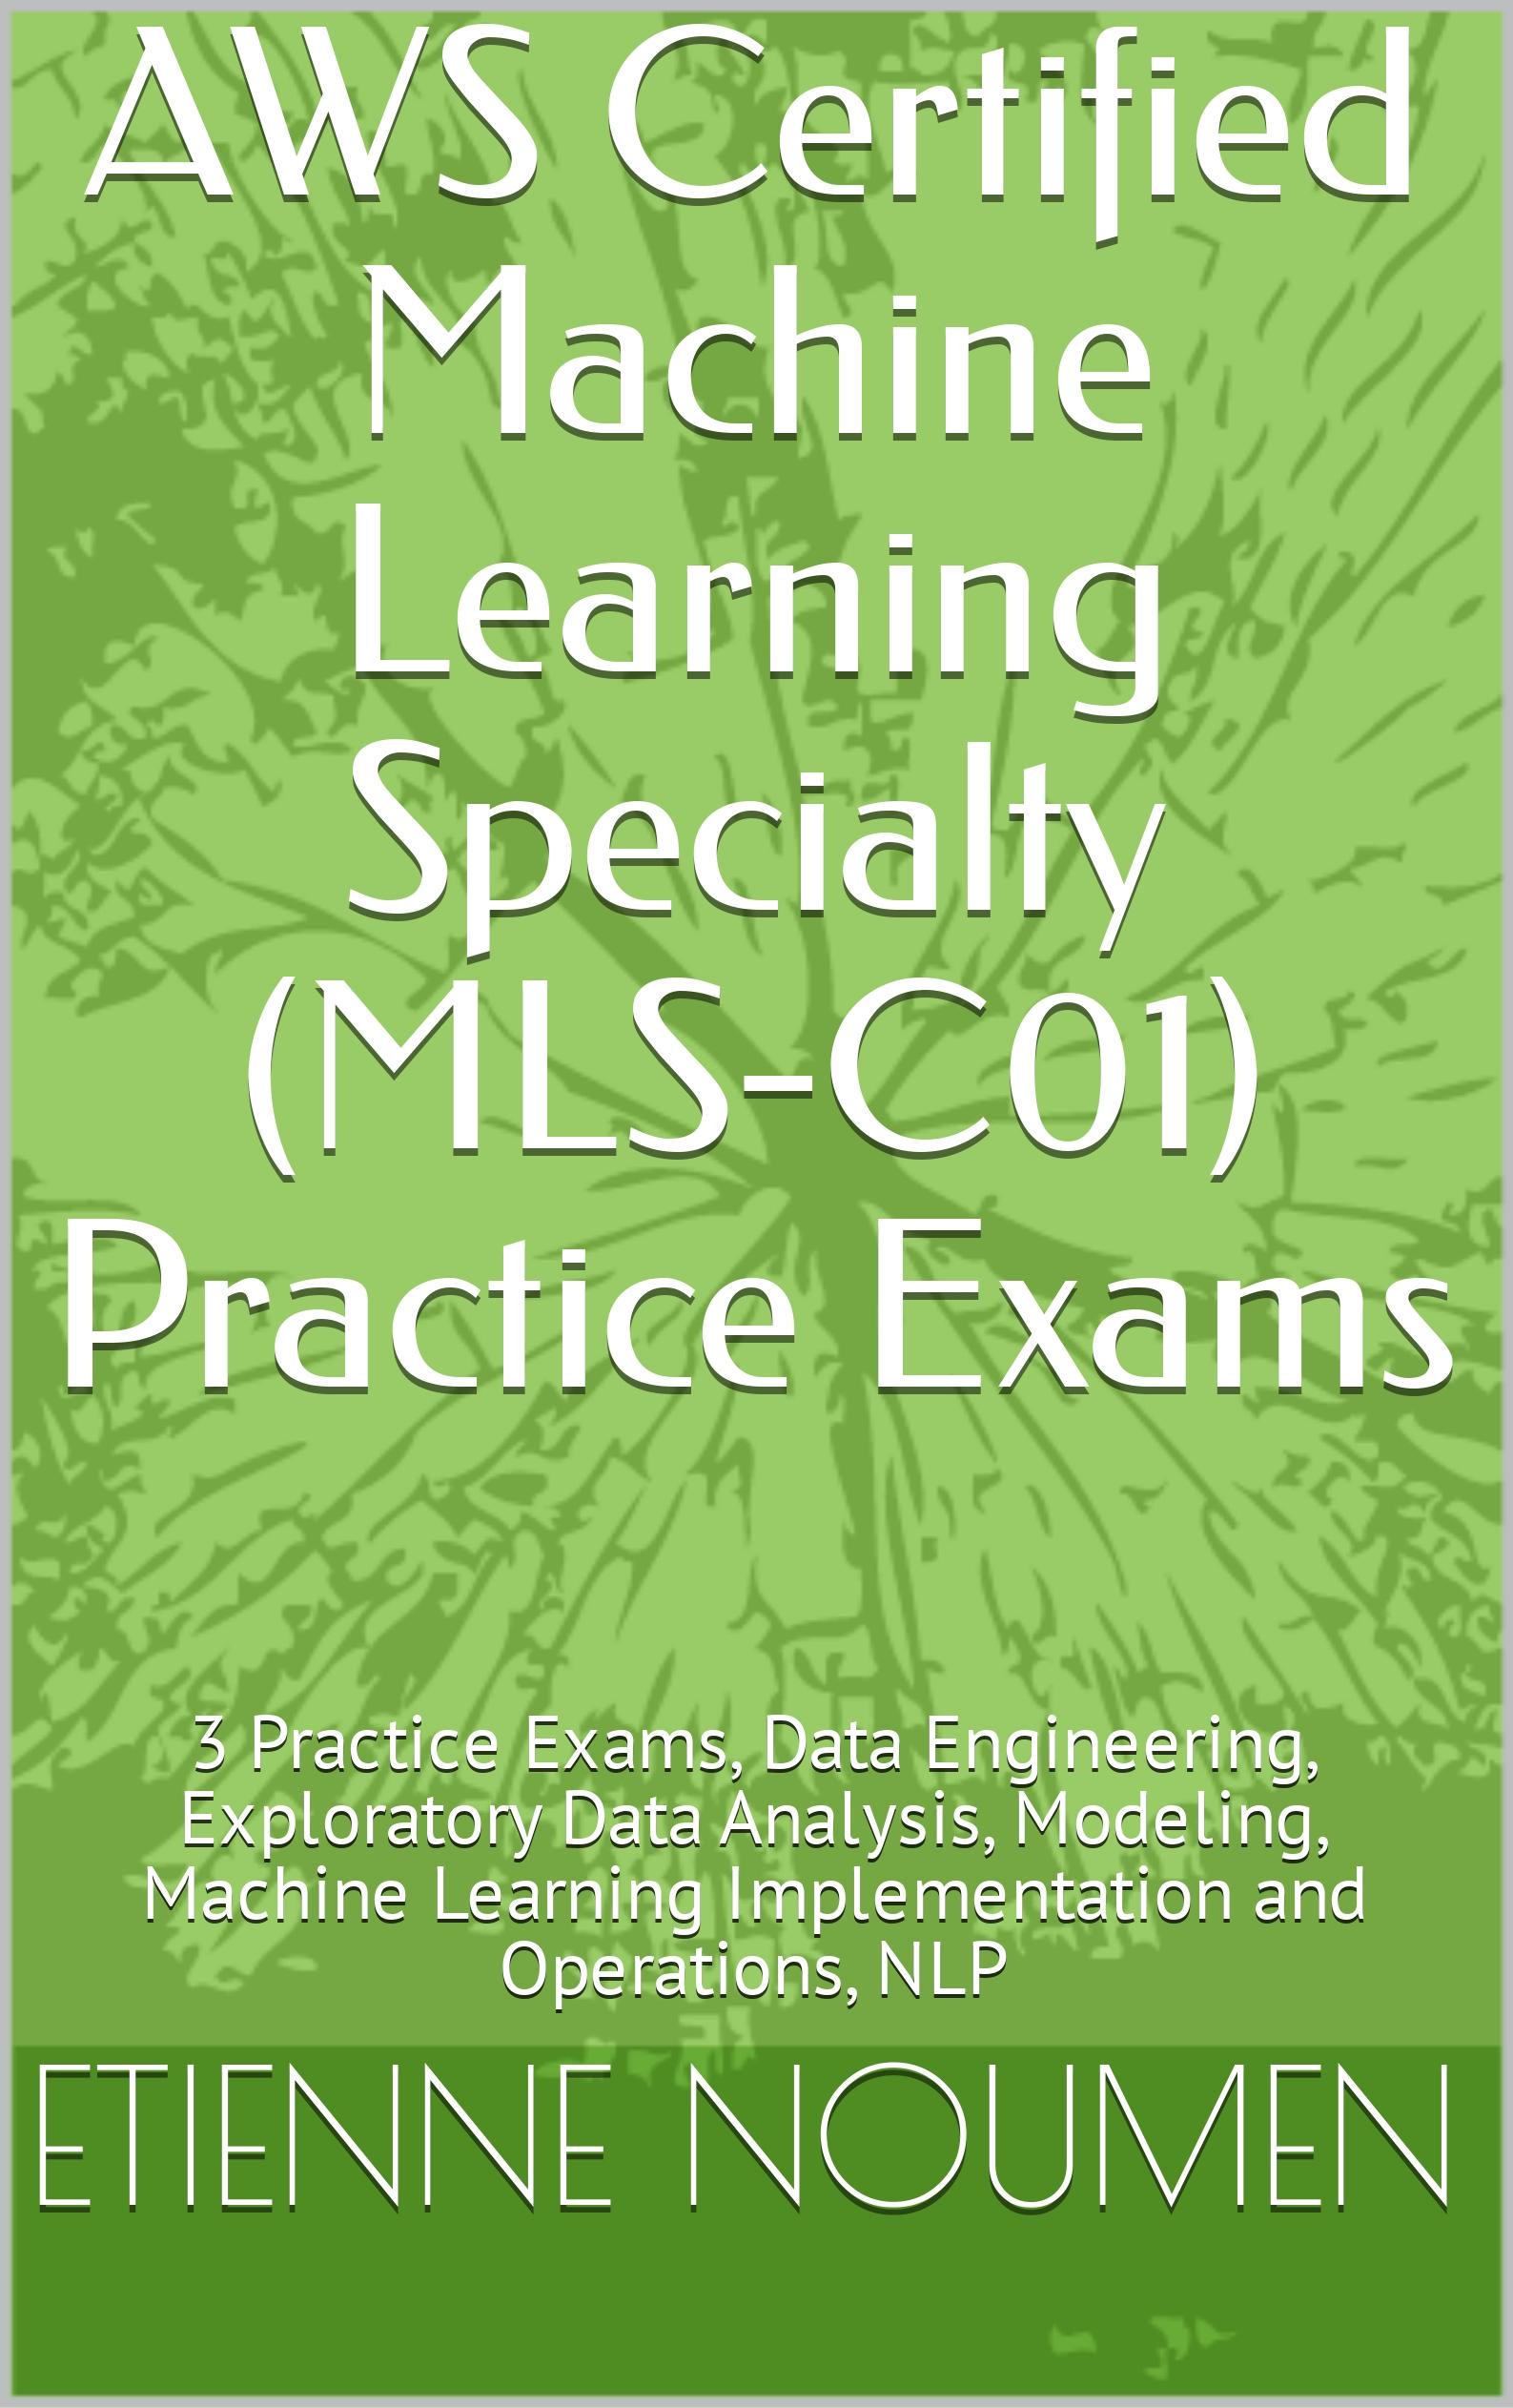 2023 AWS Certified Machine Learning Specialty (MLS-C01) Practice Exams